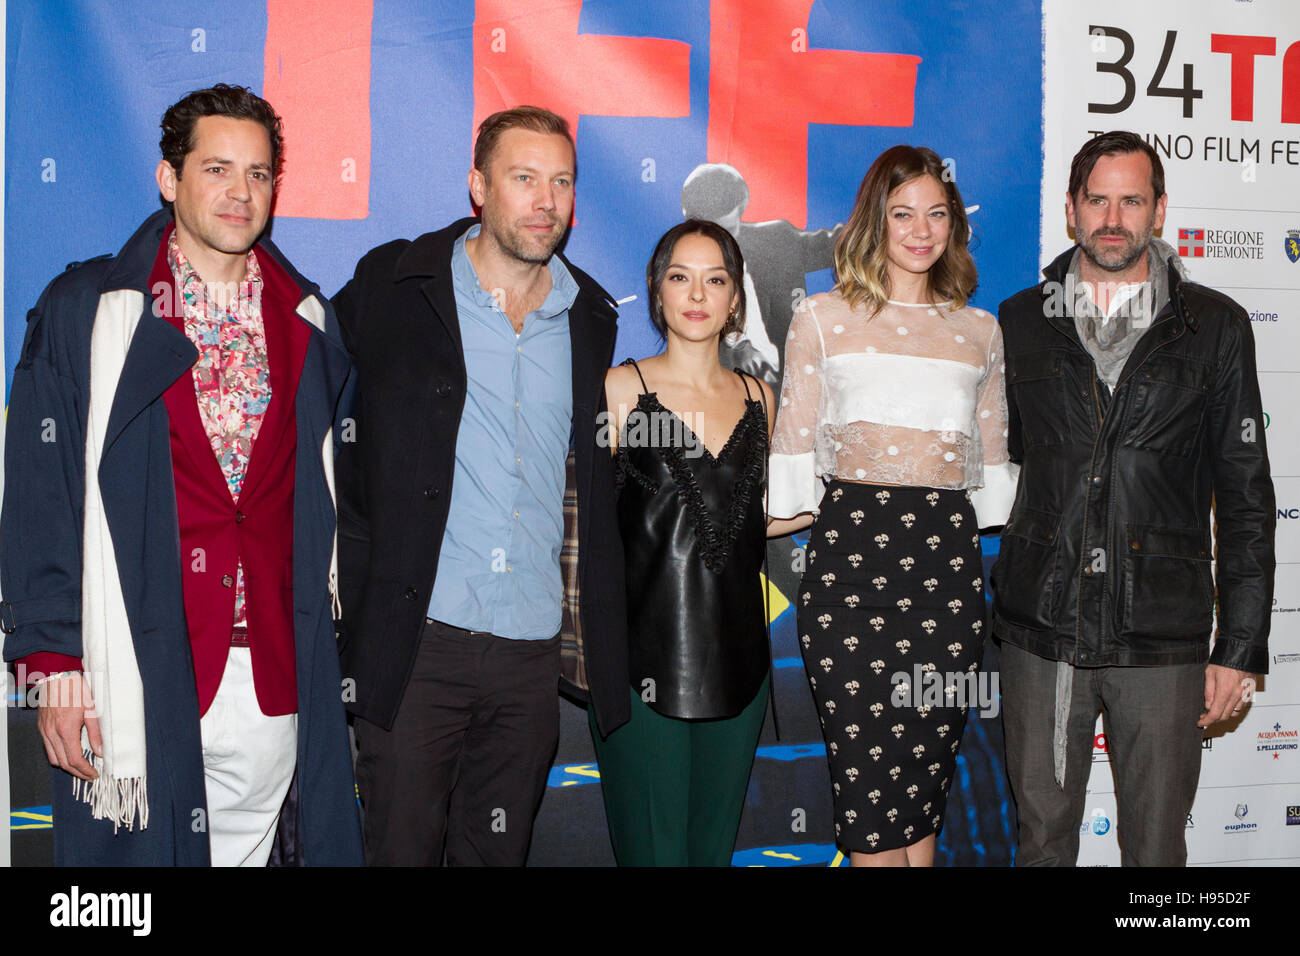 Torino, Italy. 19th Nov, 2016. The cast of the movie 'Sadie' is guest of Torino Film Festival. From left to right: actors Valentin Merlet, Jakob Cedergren, Marta Gastini, Analeigh Tipton and director Craig Goodwill. Stock Photo